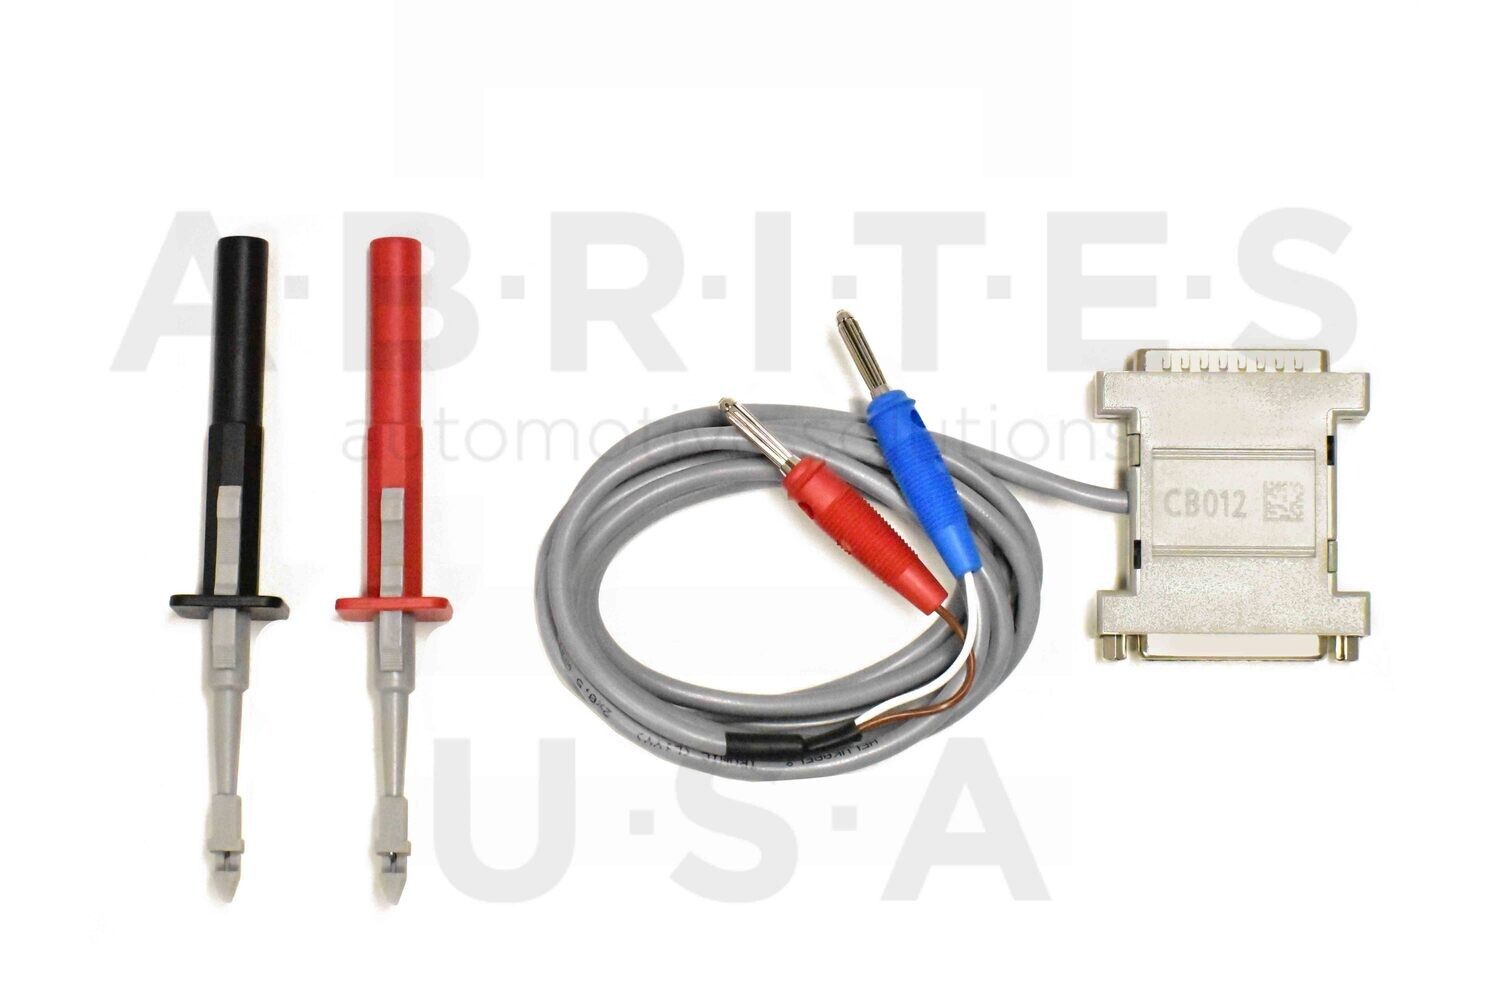 CB012- ABRITES cable set for direct CAN-BUS connection